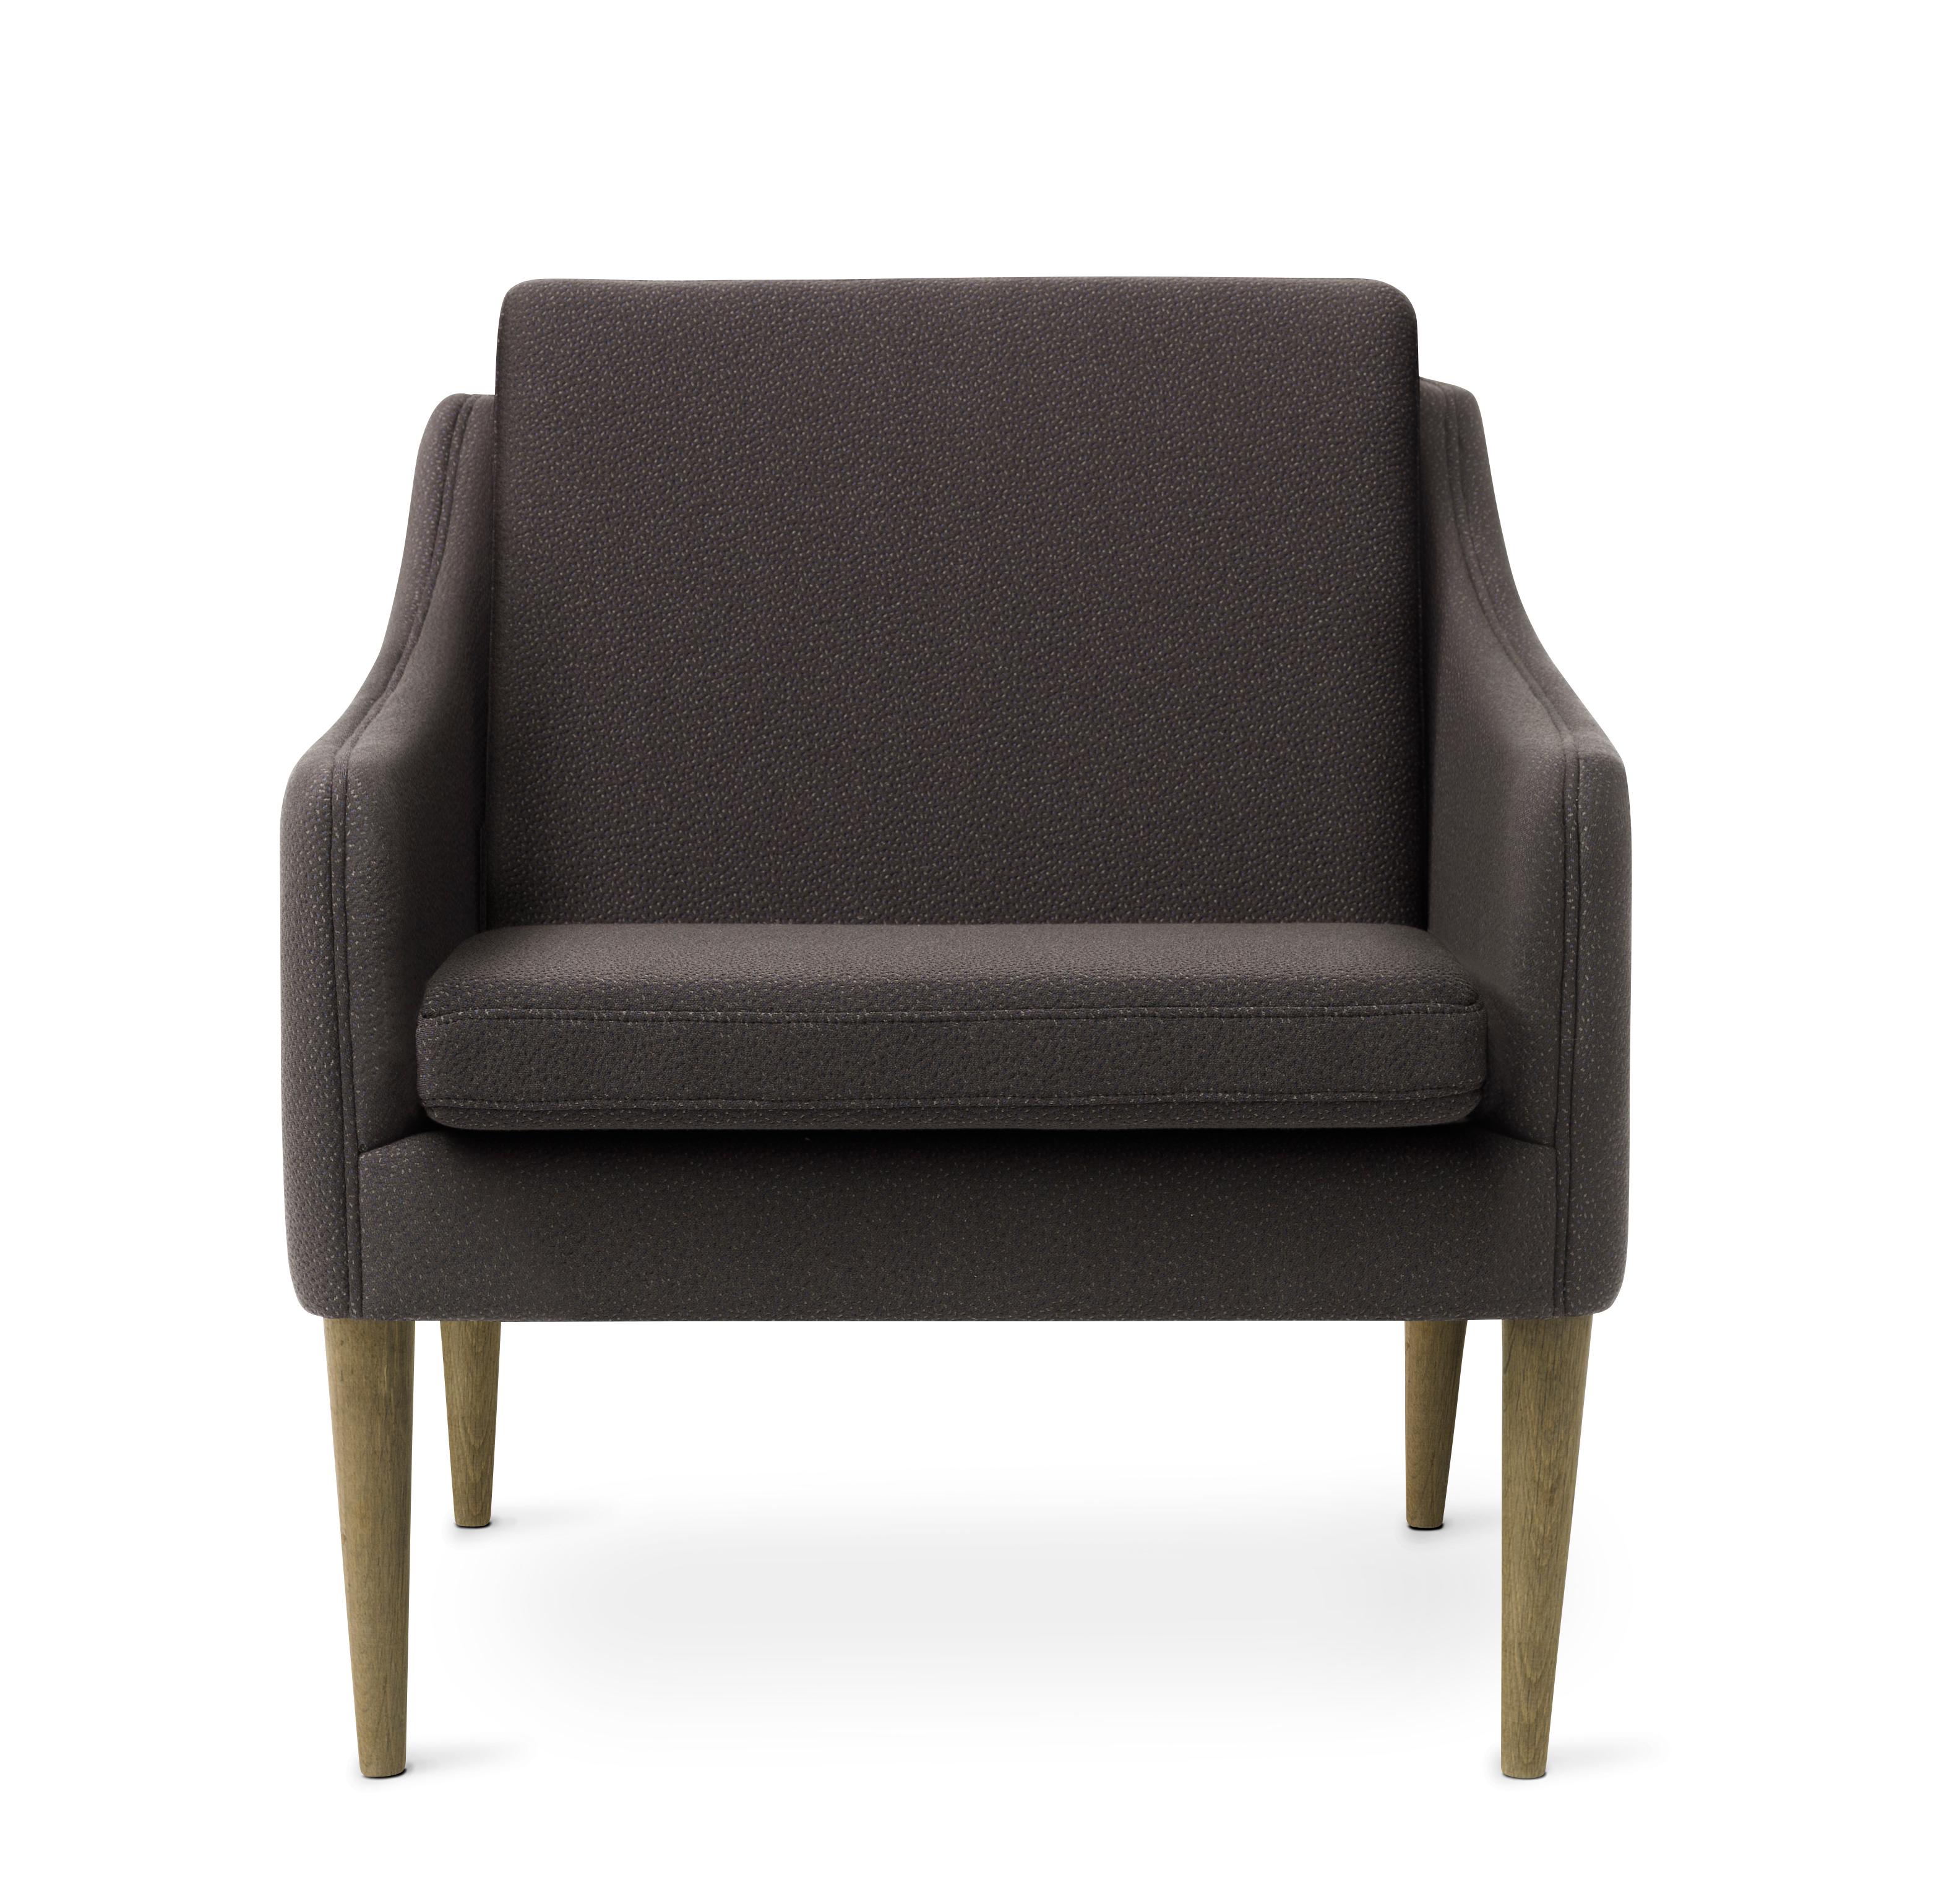 For Sale: Gray (Sprinkles 294) Mr. Olsen Lounge Chair with Smoked Oak Legs, by Hans Olsen from Warm Nordic